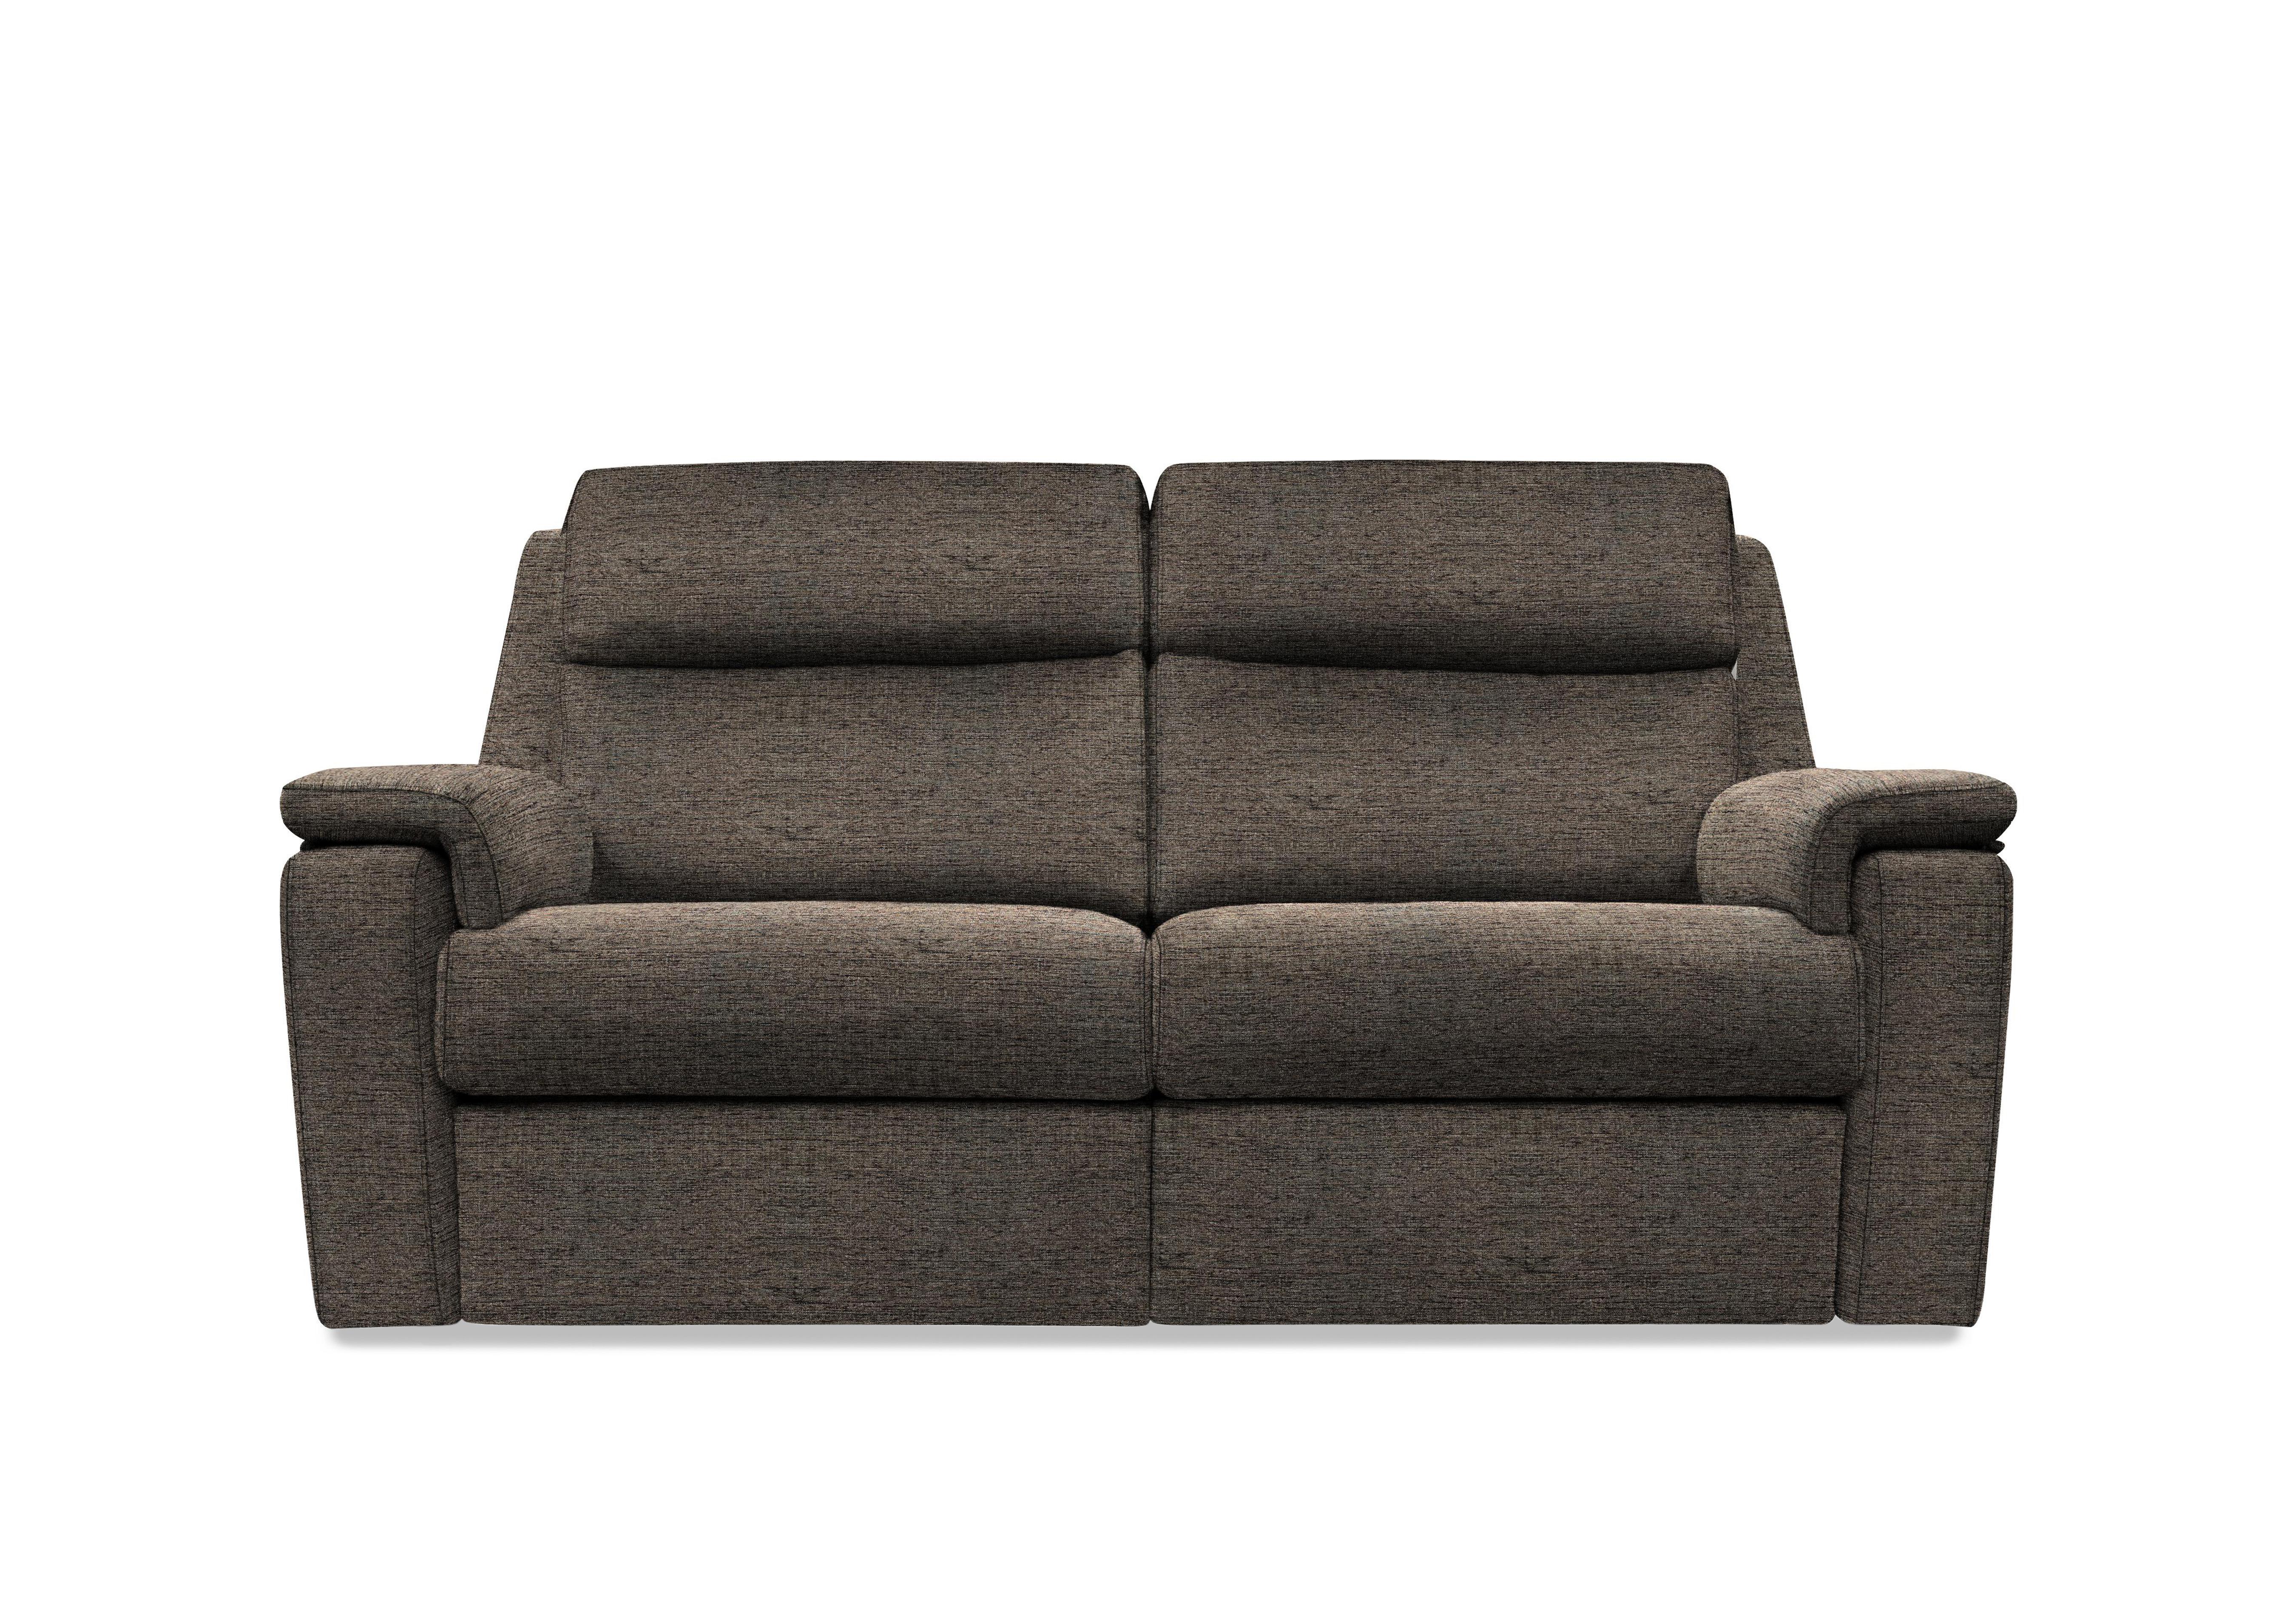 Thornbury 3 Seater Fabric Power Recliner Sofa with Power Headrests and Power Lumbar in A008 Yarn Slate on Furniture Village